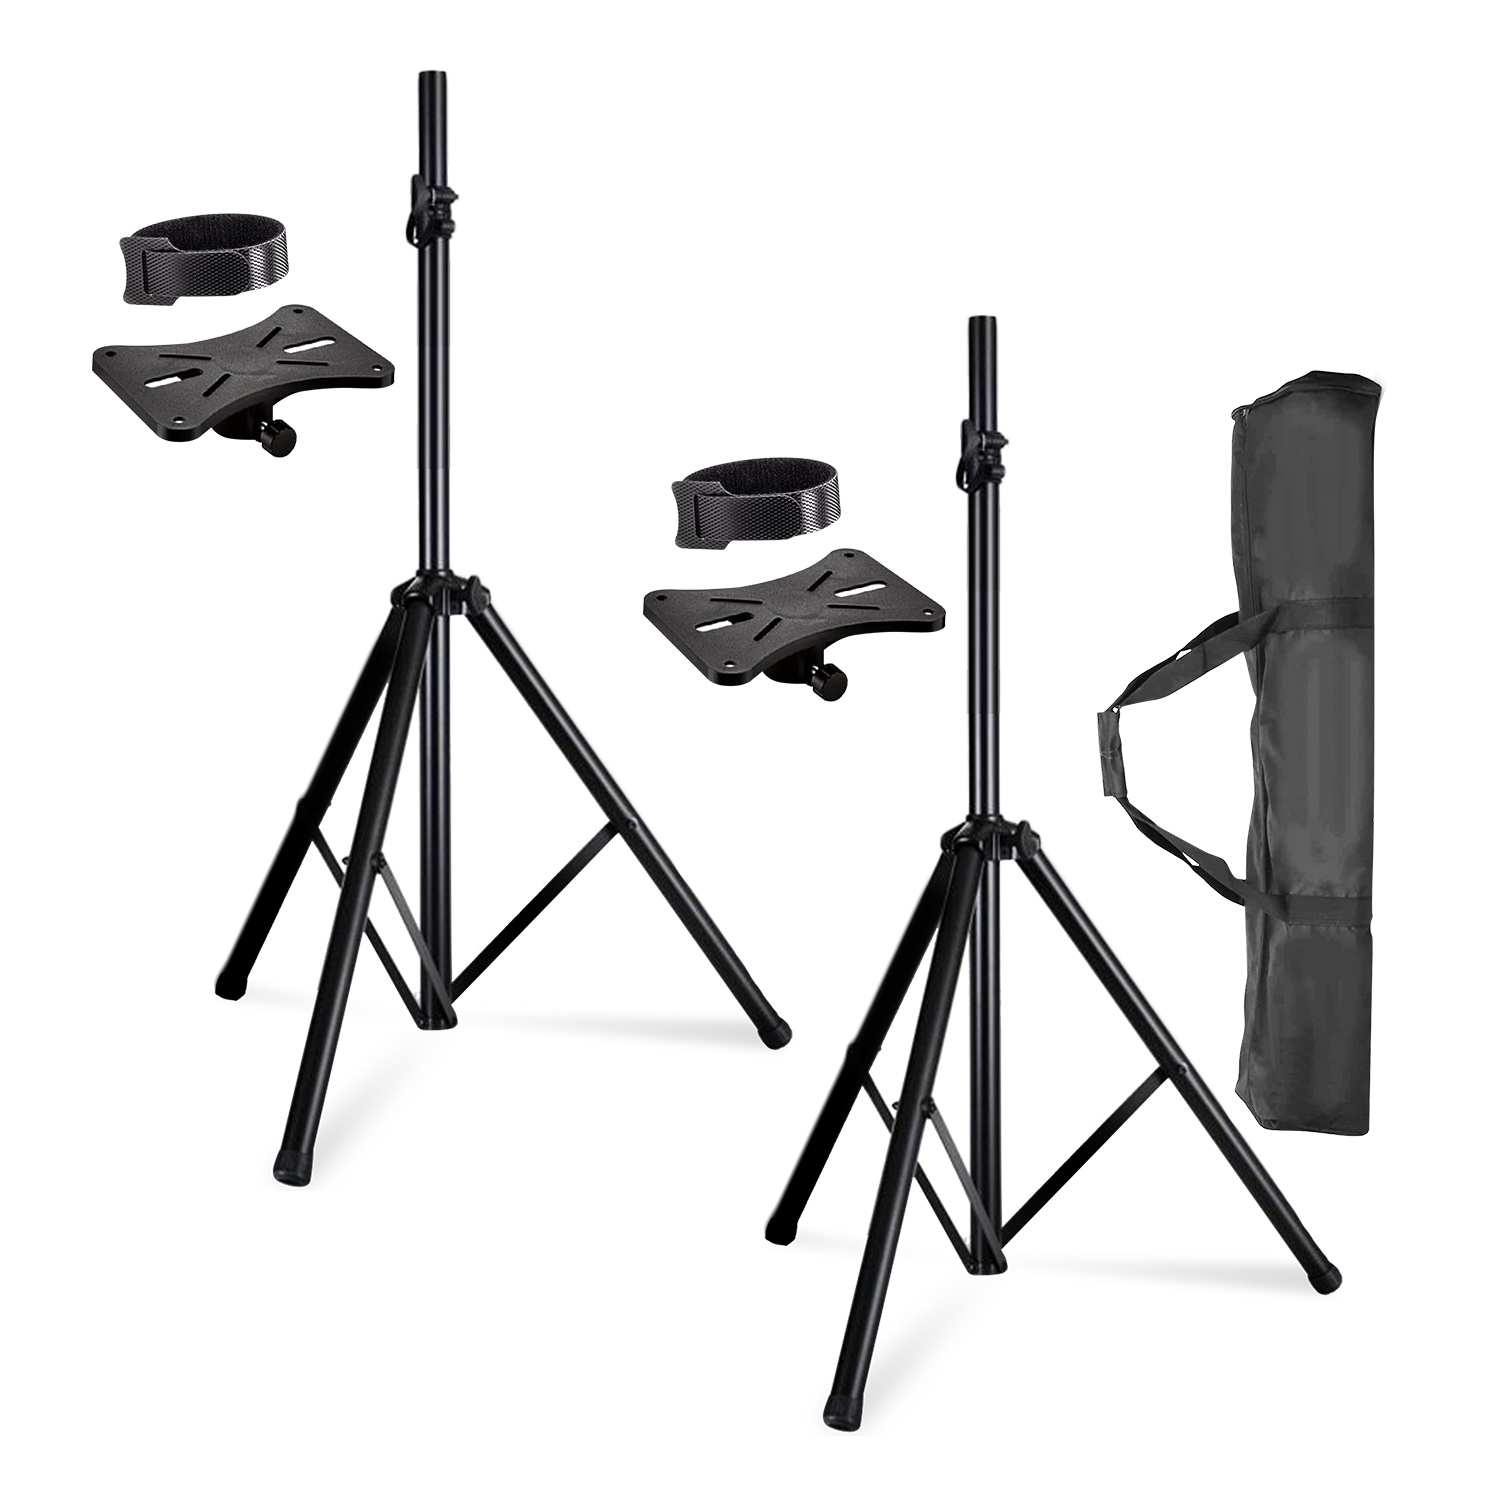 5 Core Speakers Stands 2 Pieces Black Heavy Duty Height Adjustable Tripod PA Monitor Holder for Large Speakers DJ Stand Para Bocinas -SS HD 2PK BLK WOB